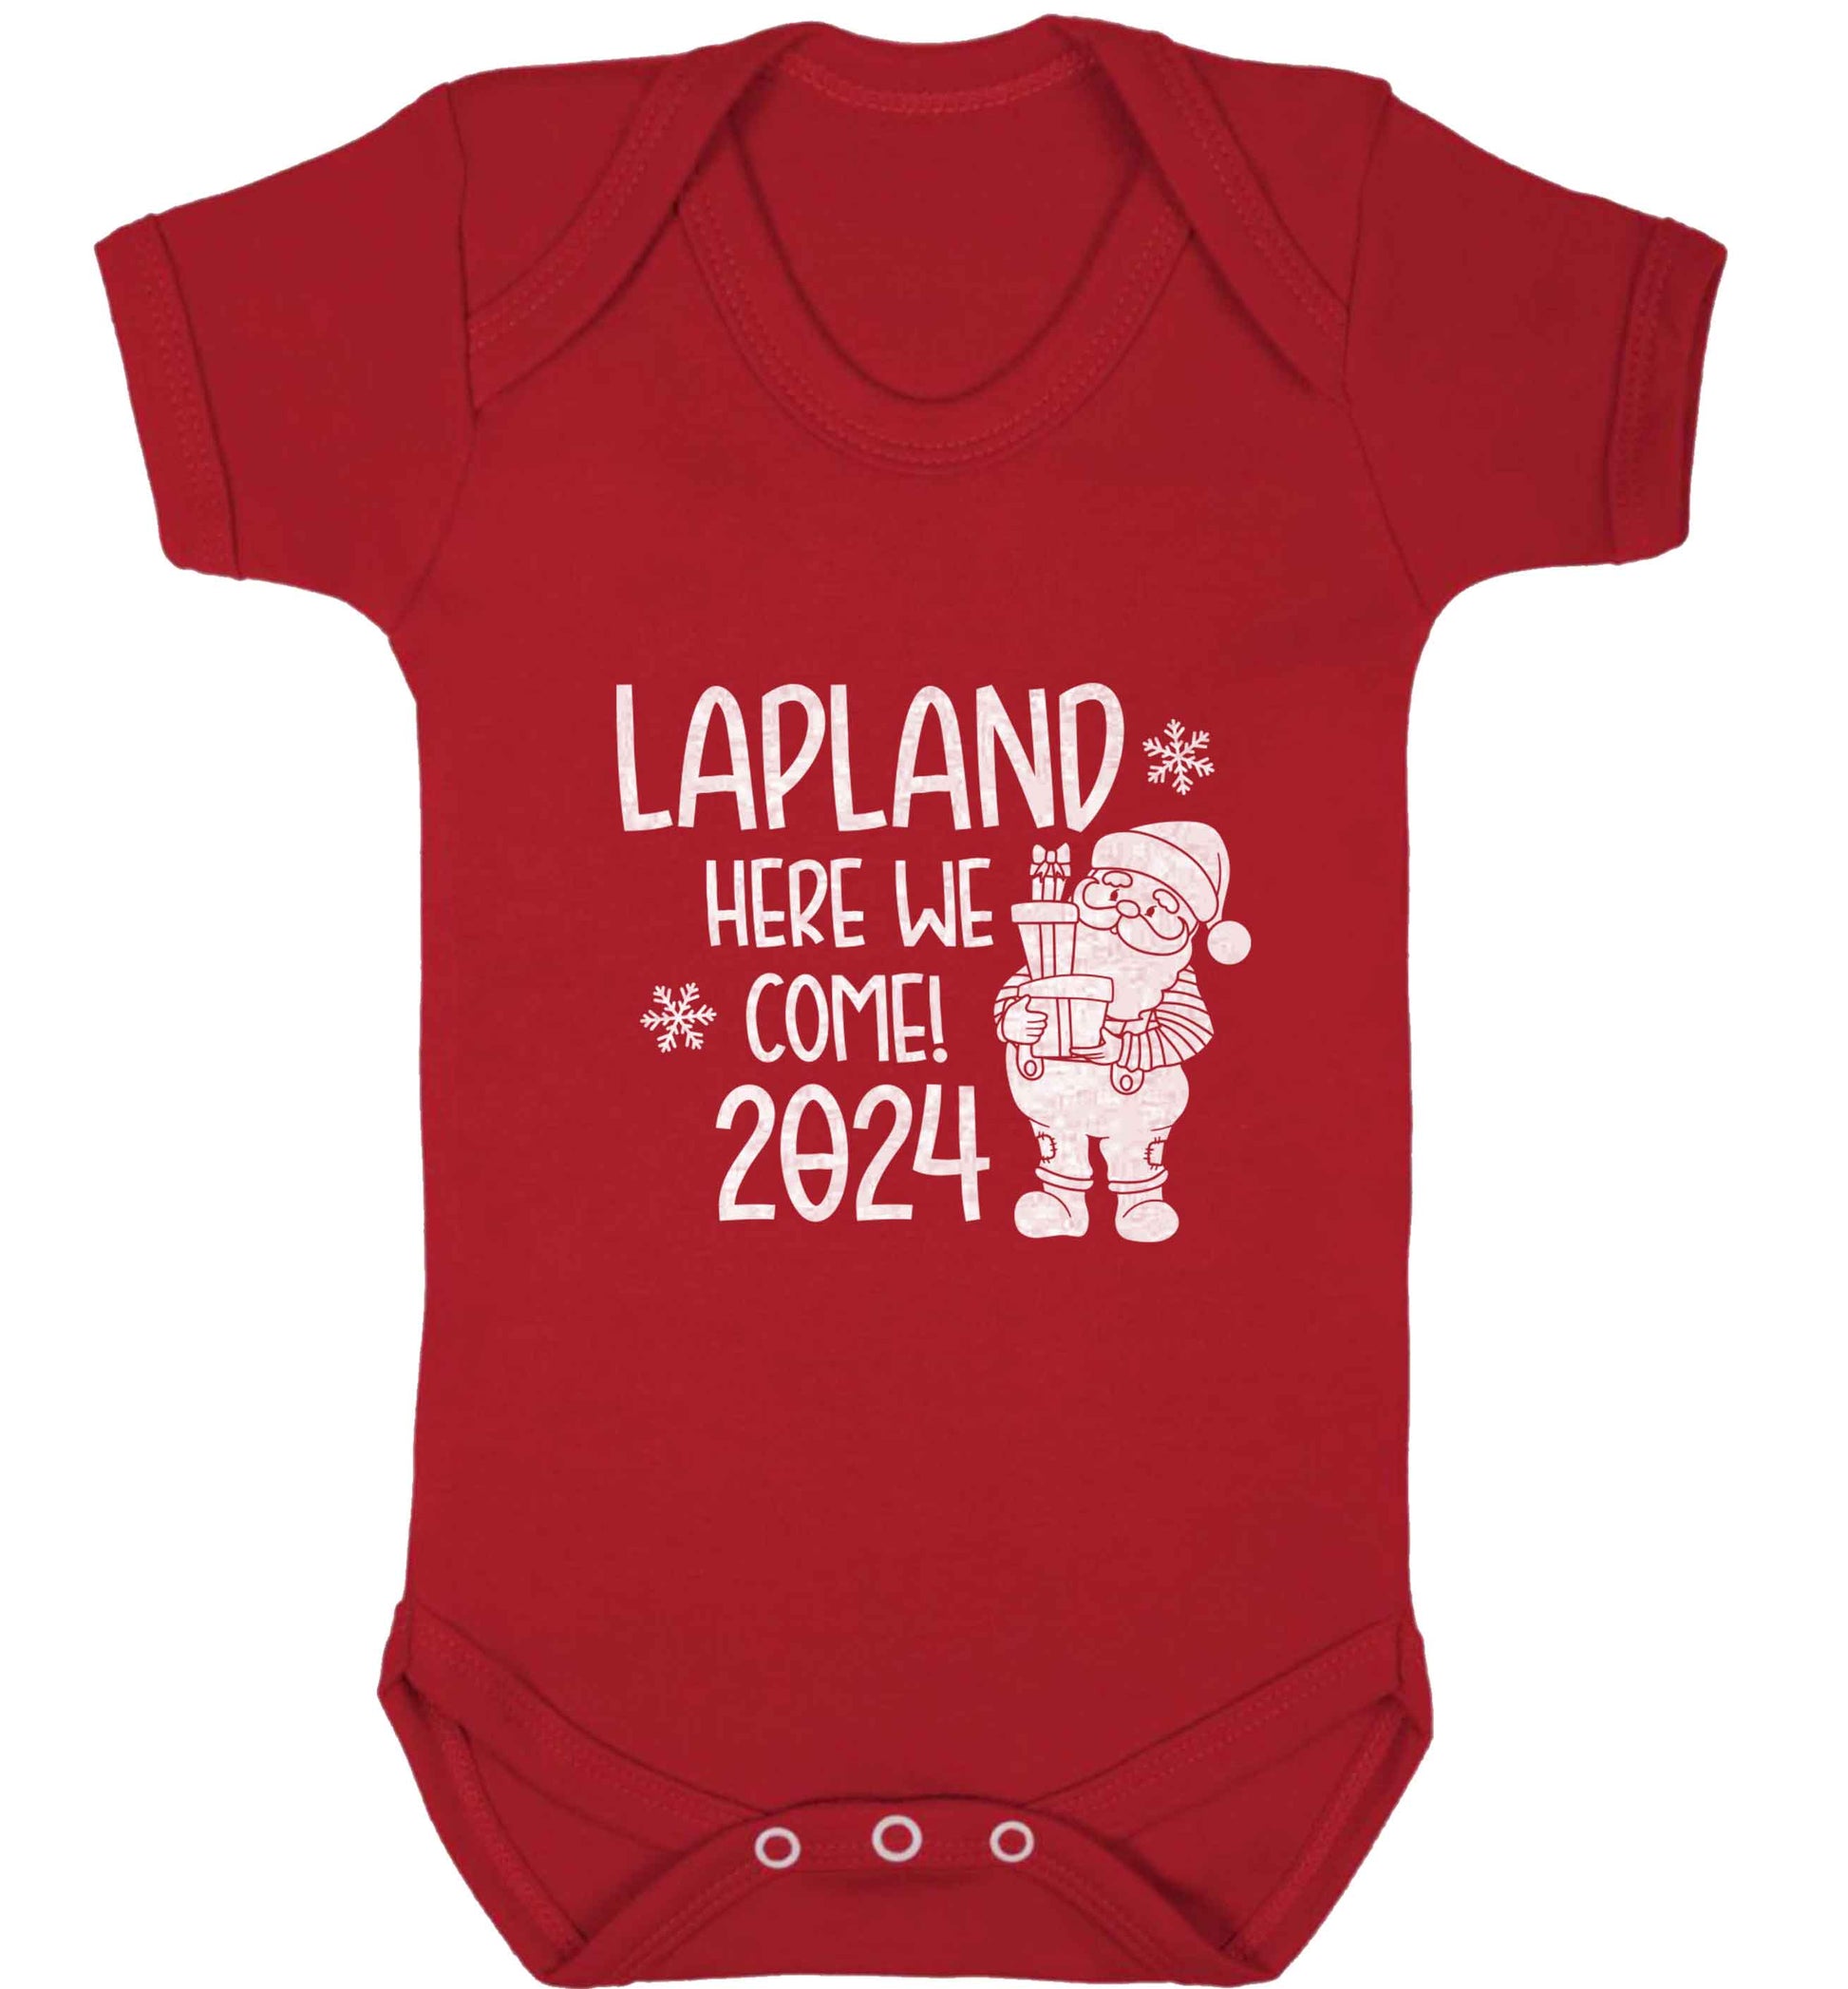 Lapland here we come baby vest red 18-24 months